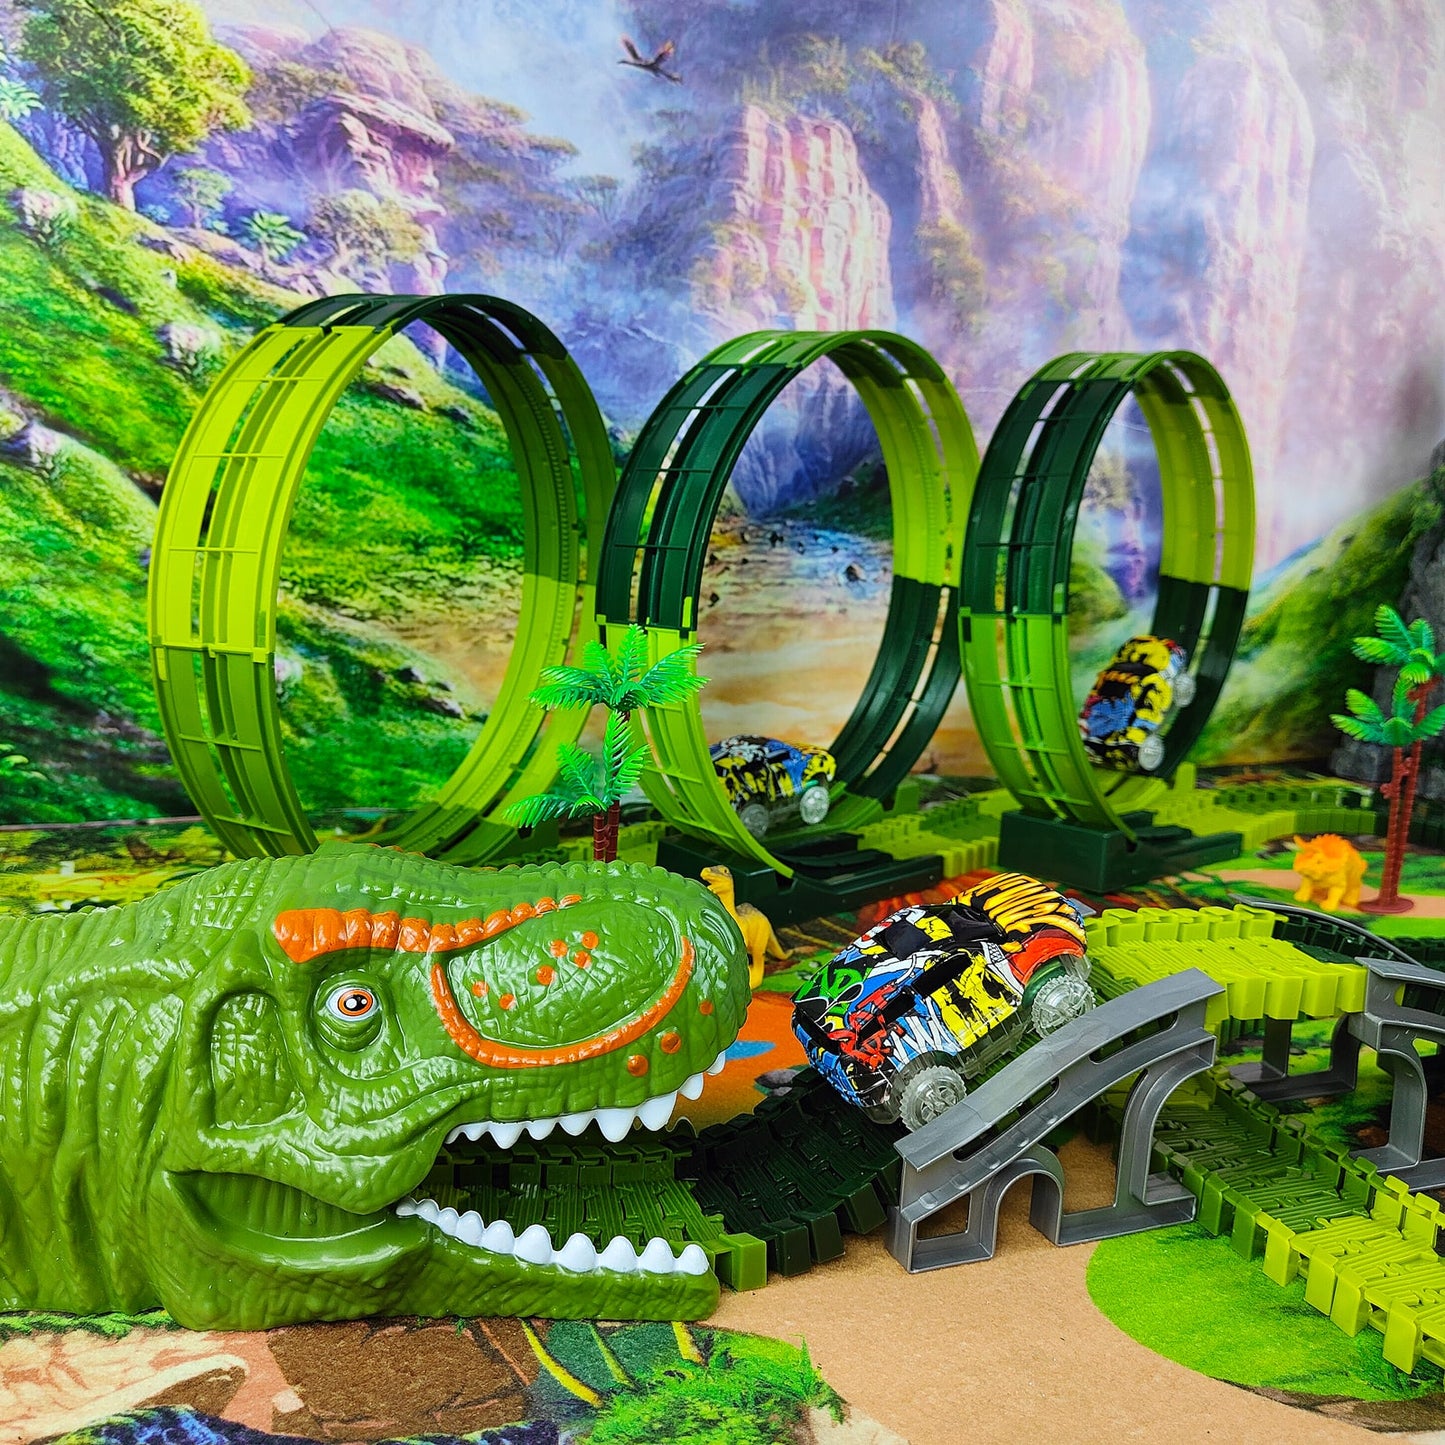 The Ultimate Dino 360 Track Set™ (3 Loops Edition)